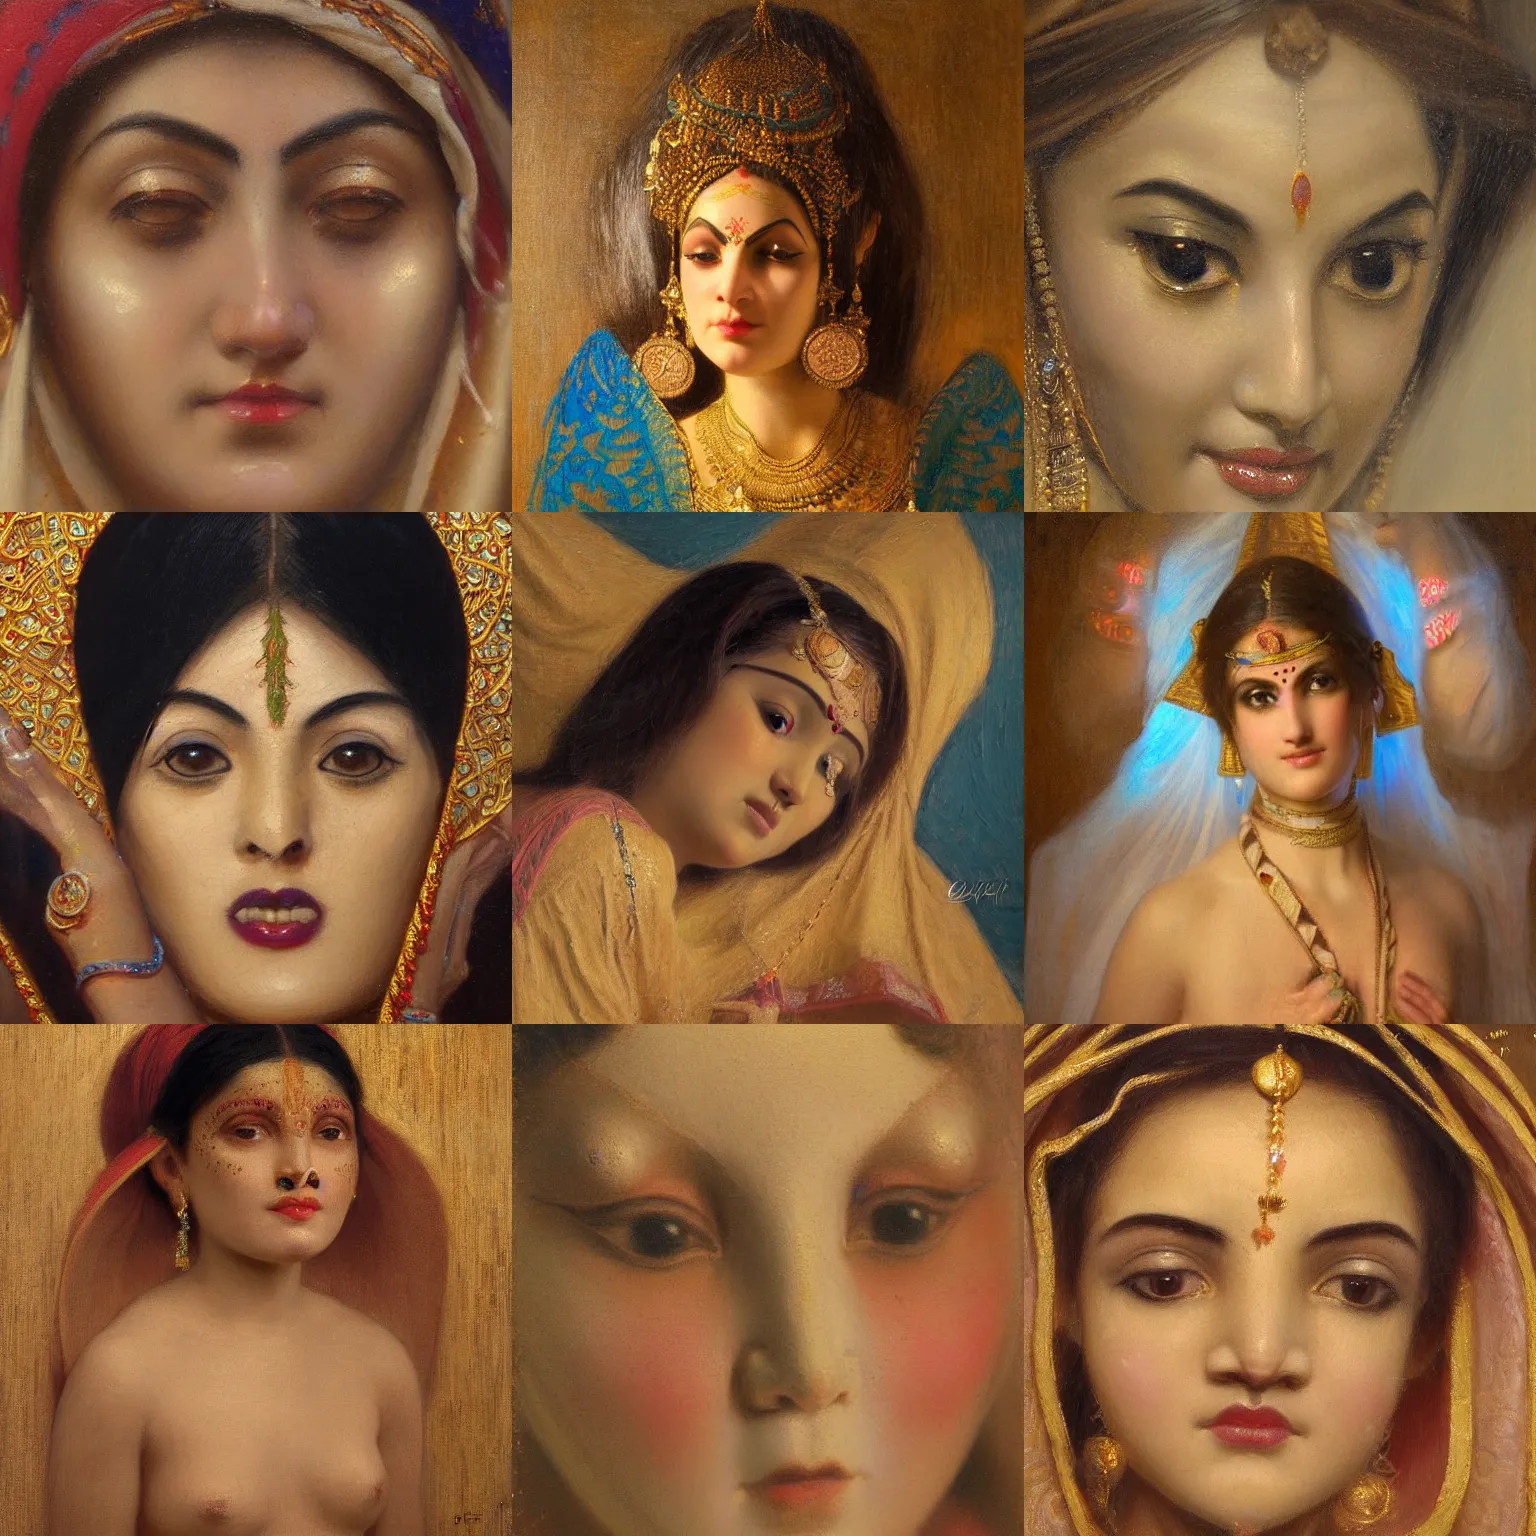 Prompt: orientalism cute female djinni face detail by edwin longsden long and theodore ralli and nasreddine dinet and adam styka, masterful intricate artwork. oil on canvas, excellent lighting, high detail 8 k